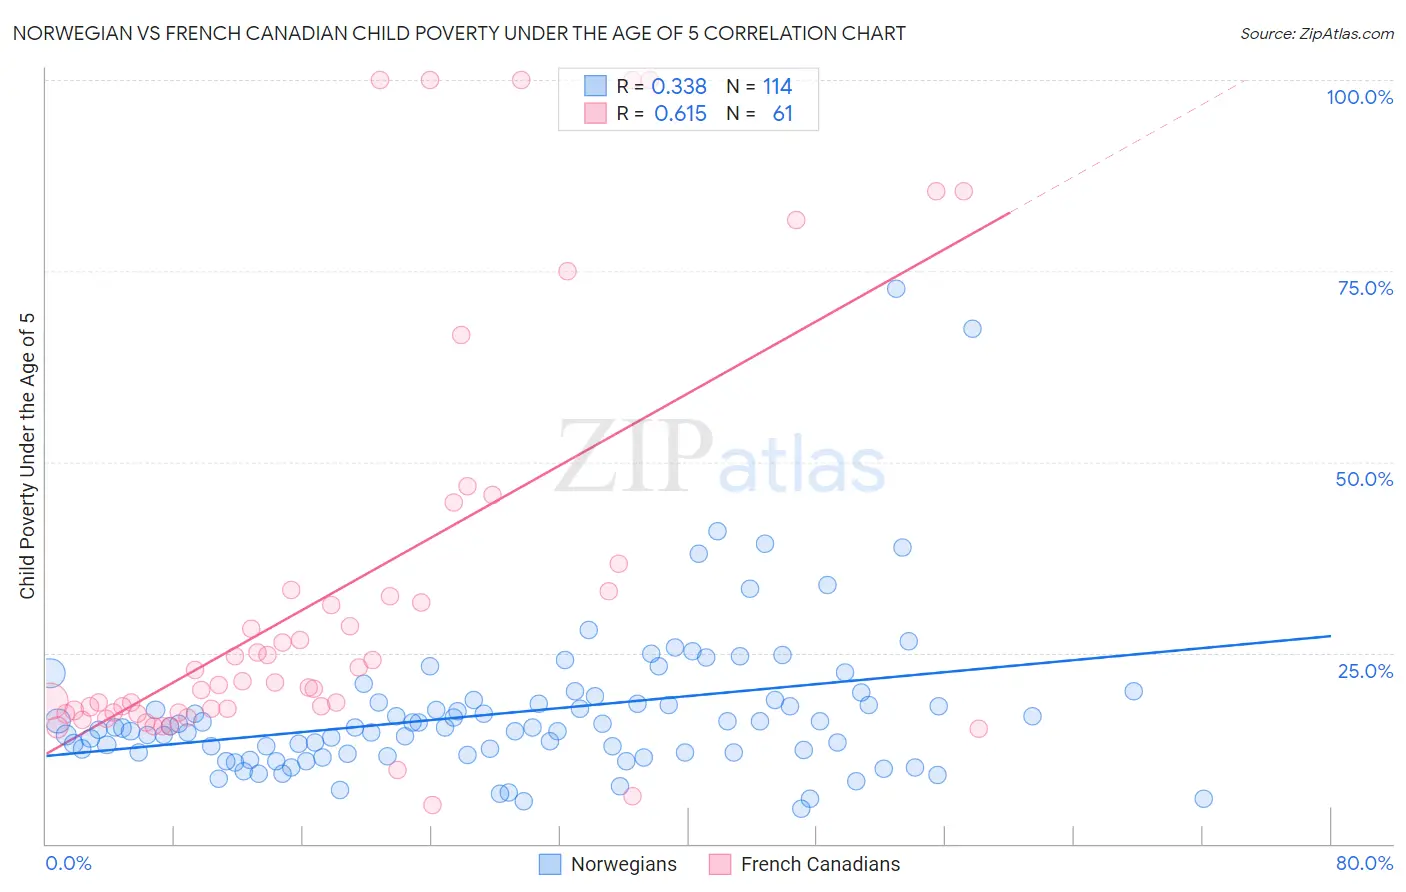 Norwegian vs French Canadian Child Poverty Under the Age of 5